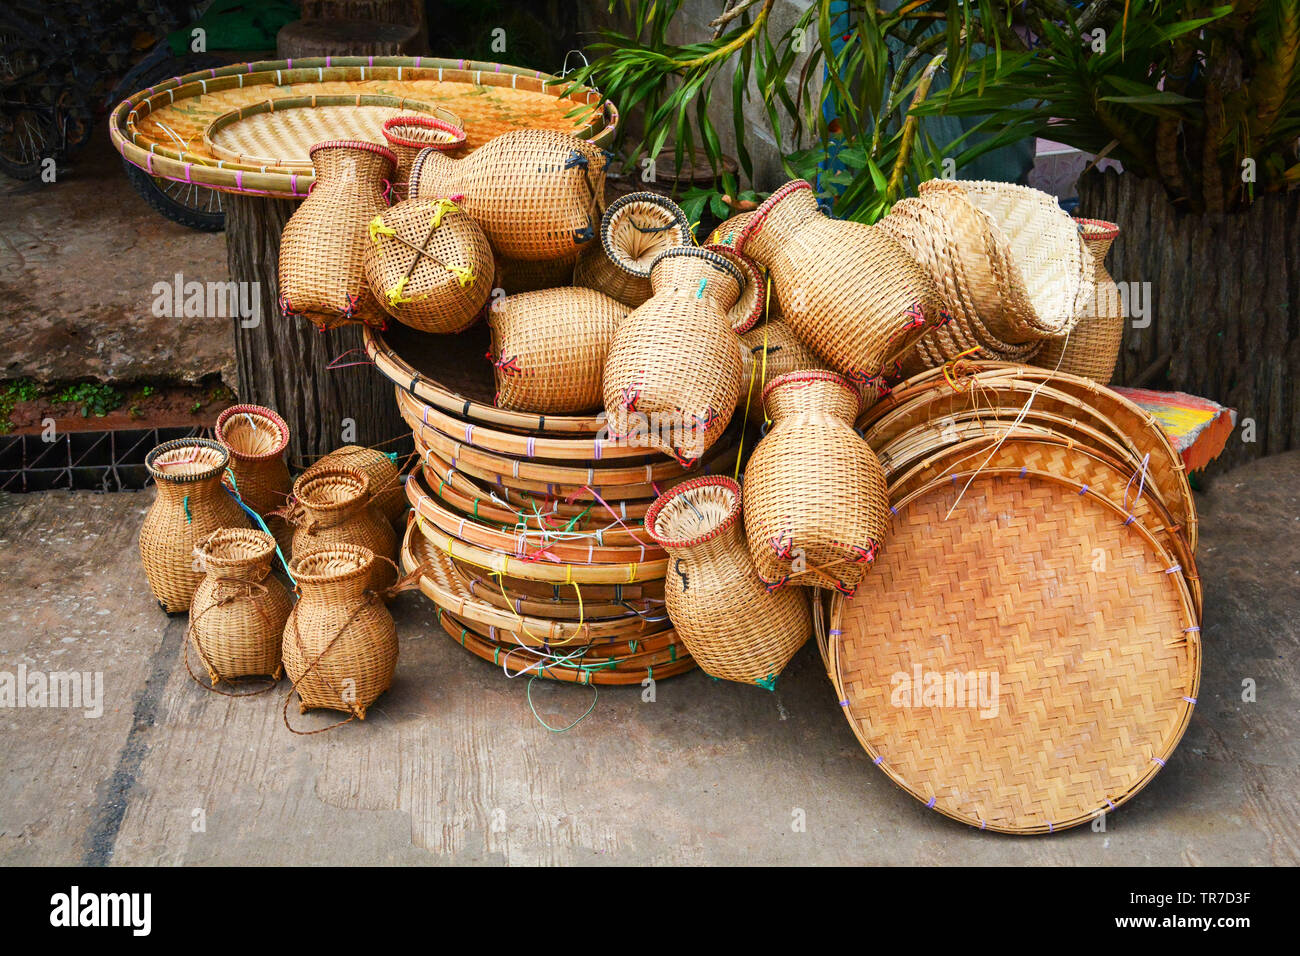 https://c8.alamy.com/comp/TR7D3F/rattan-and-bamboo-basket-handicraft-various-is-threshing-basket-fishtrap-hand-made-bamboo-weaving-container-in-local-asia-TR7D3F.jpg